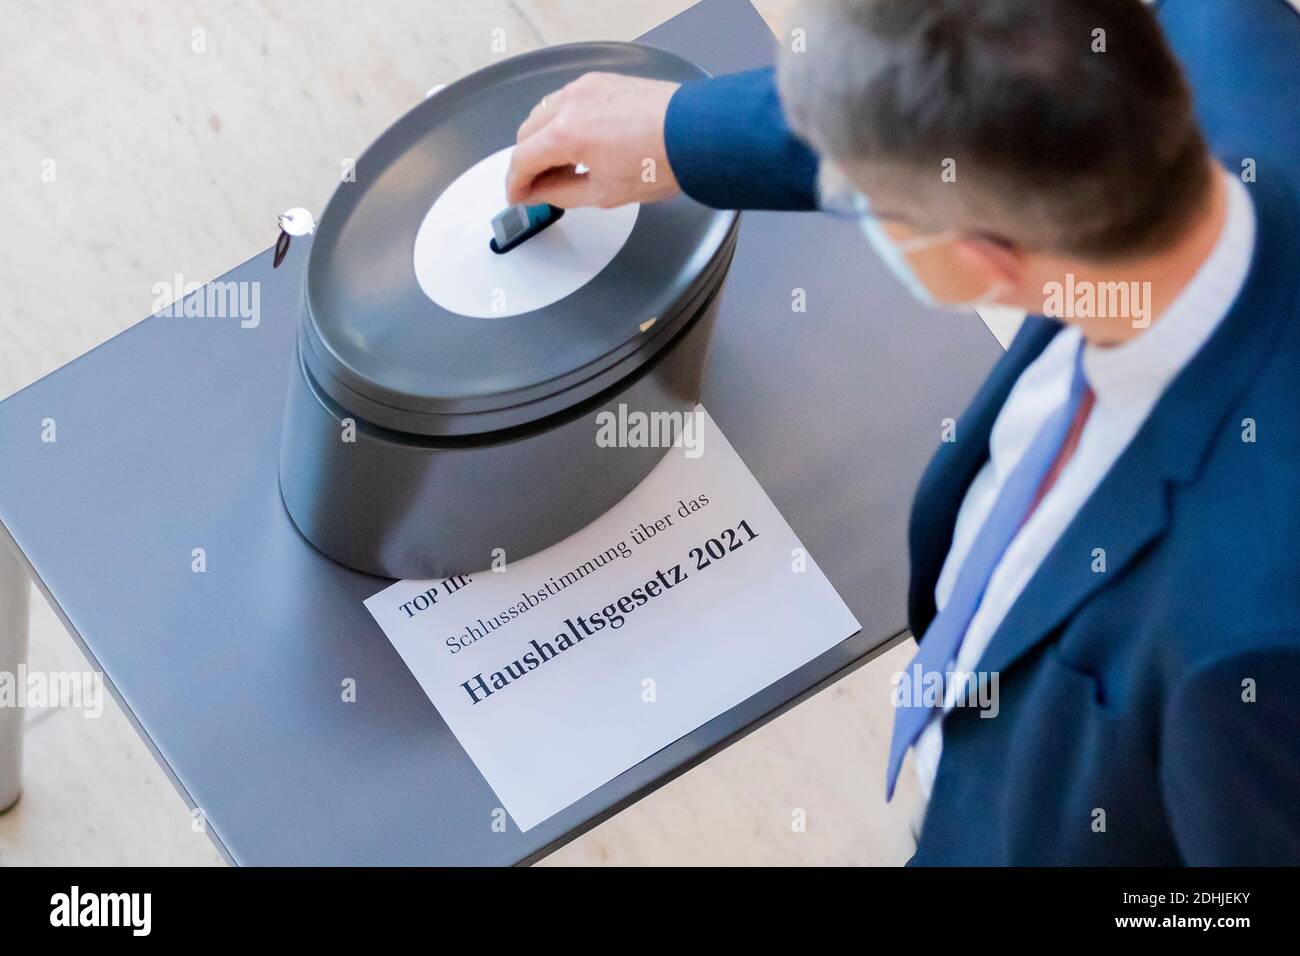 Berlin, Germany. 11th Dec, 2020. A Member of Parliament shall vote in the Bundestag during the final roll-call vote on the 2021 Budget Act. Credit: Christoph Soeder/dpa/Alamy Live News Stock Photo